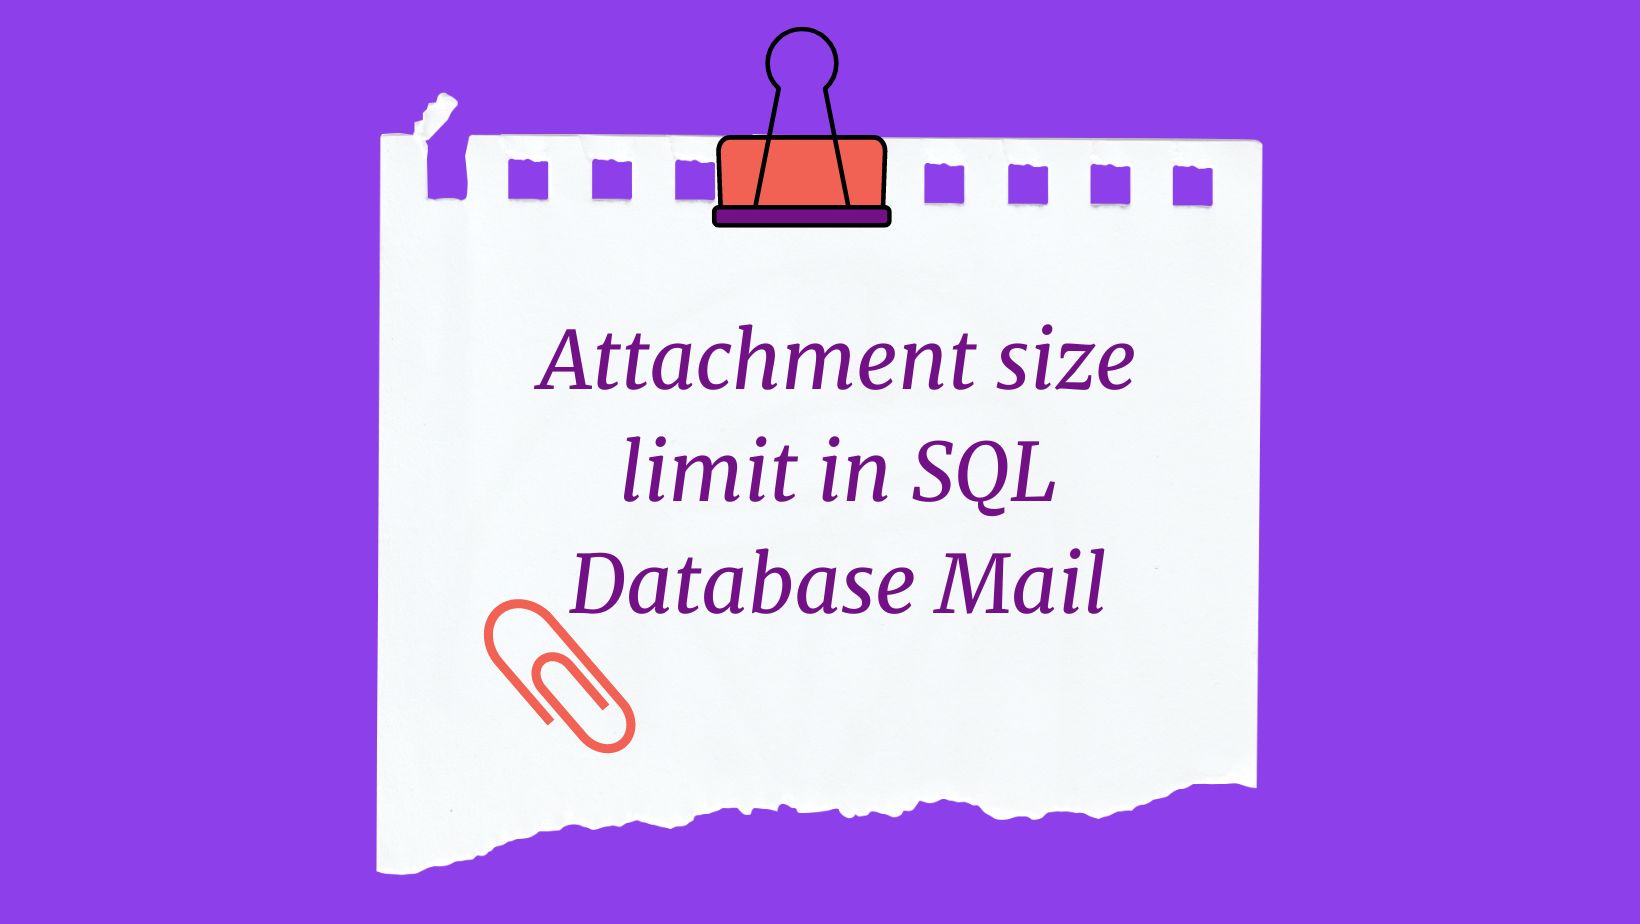 Attachment size limit in SQL Database Mail